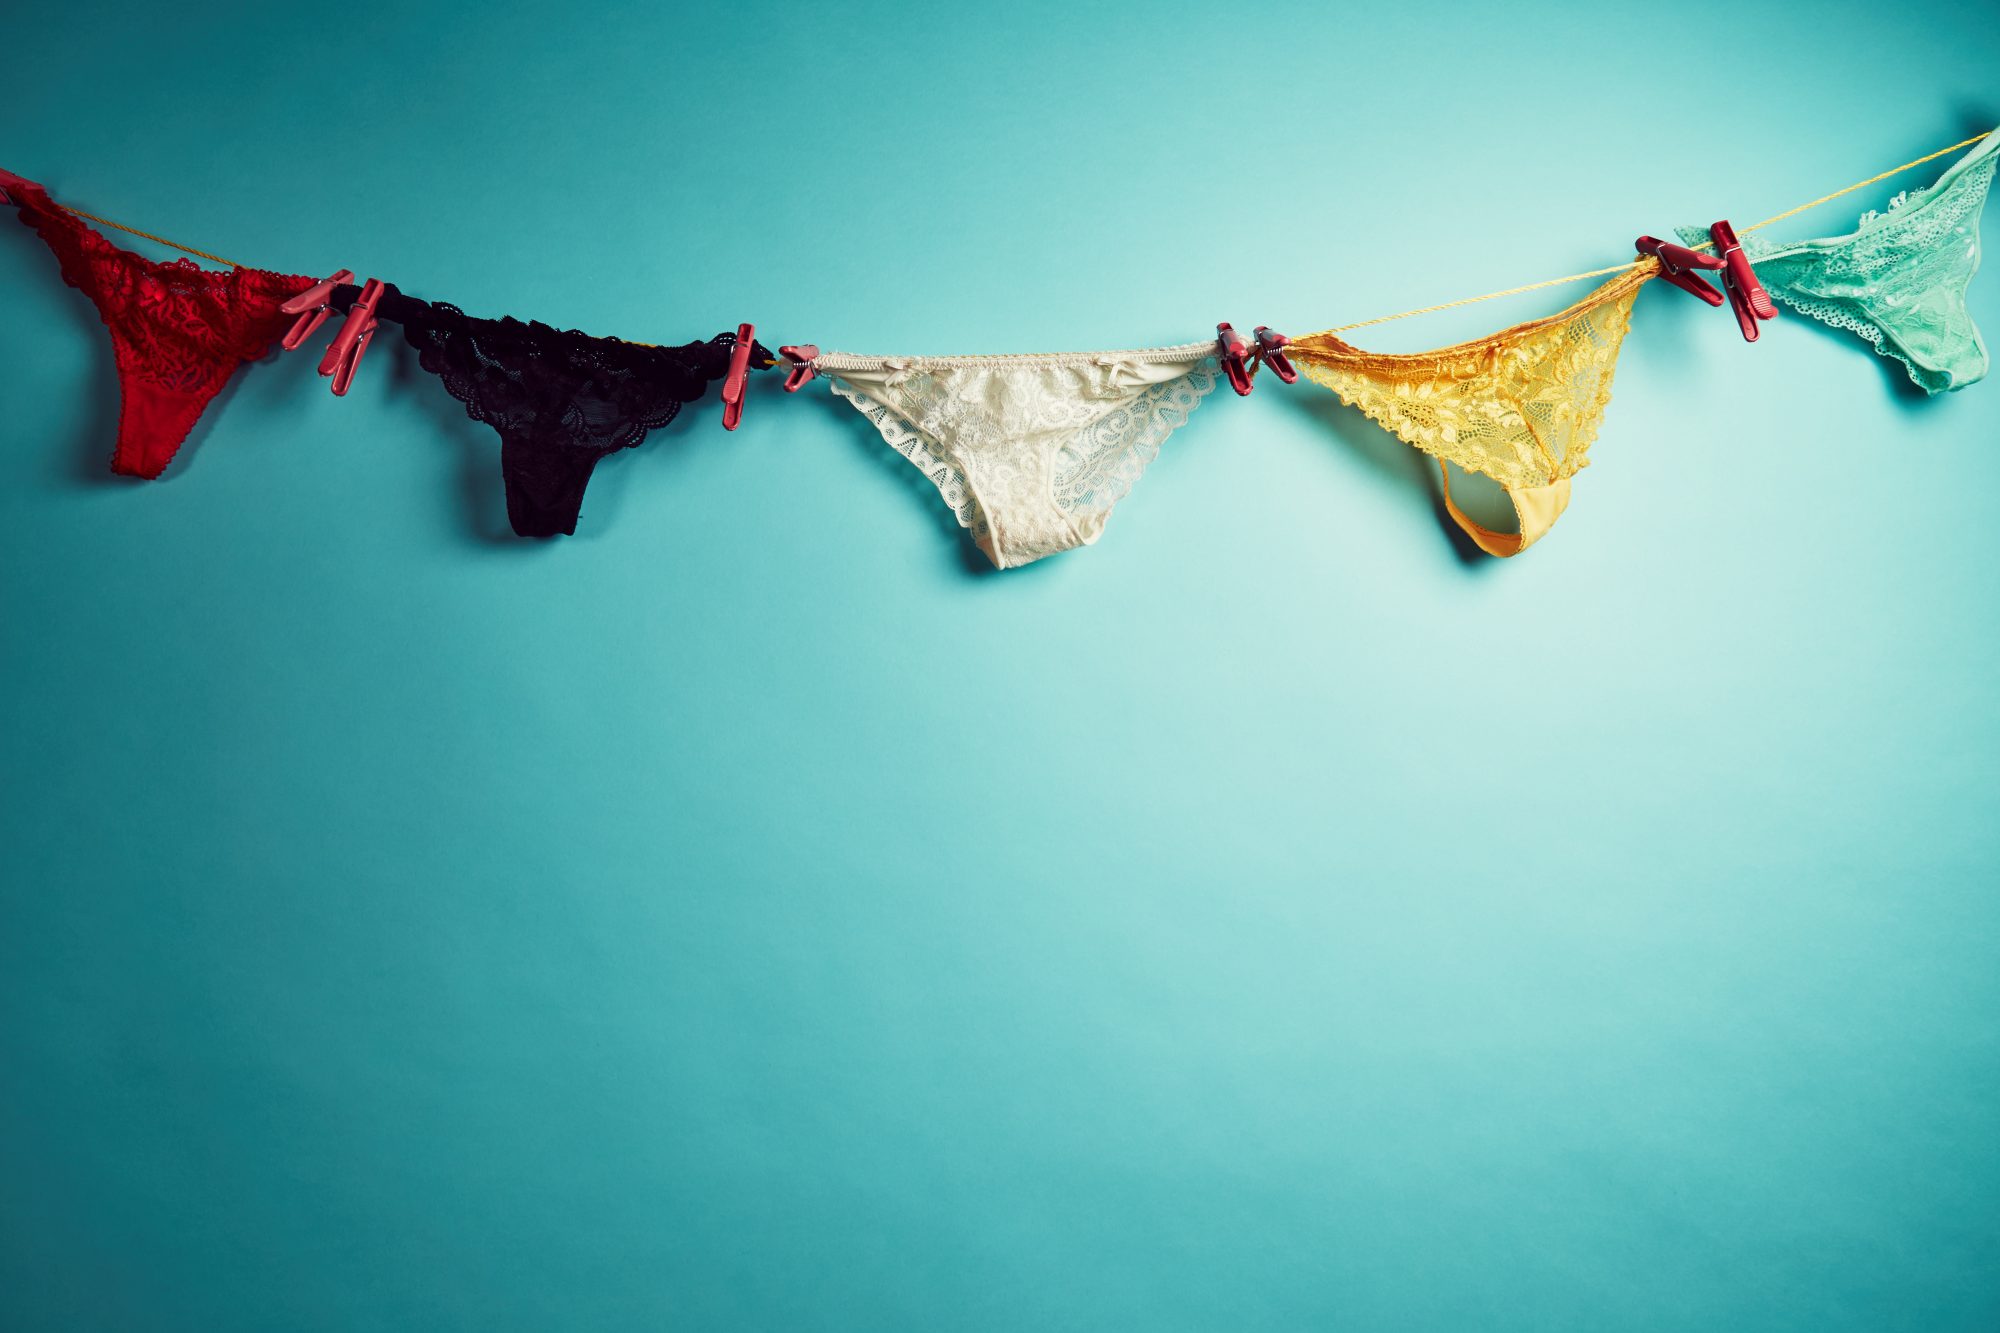 5 ways to get rid of those stains on your underwear, because it happens to the best of usHelloGiggles image